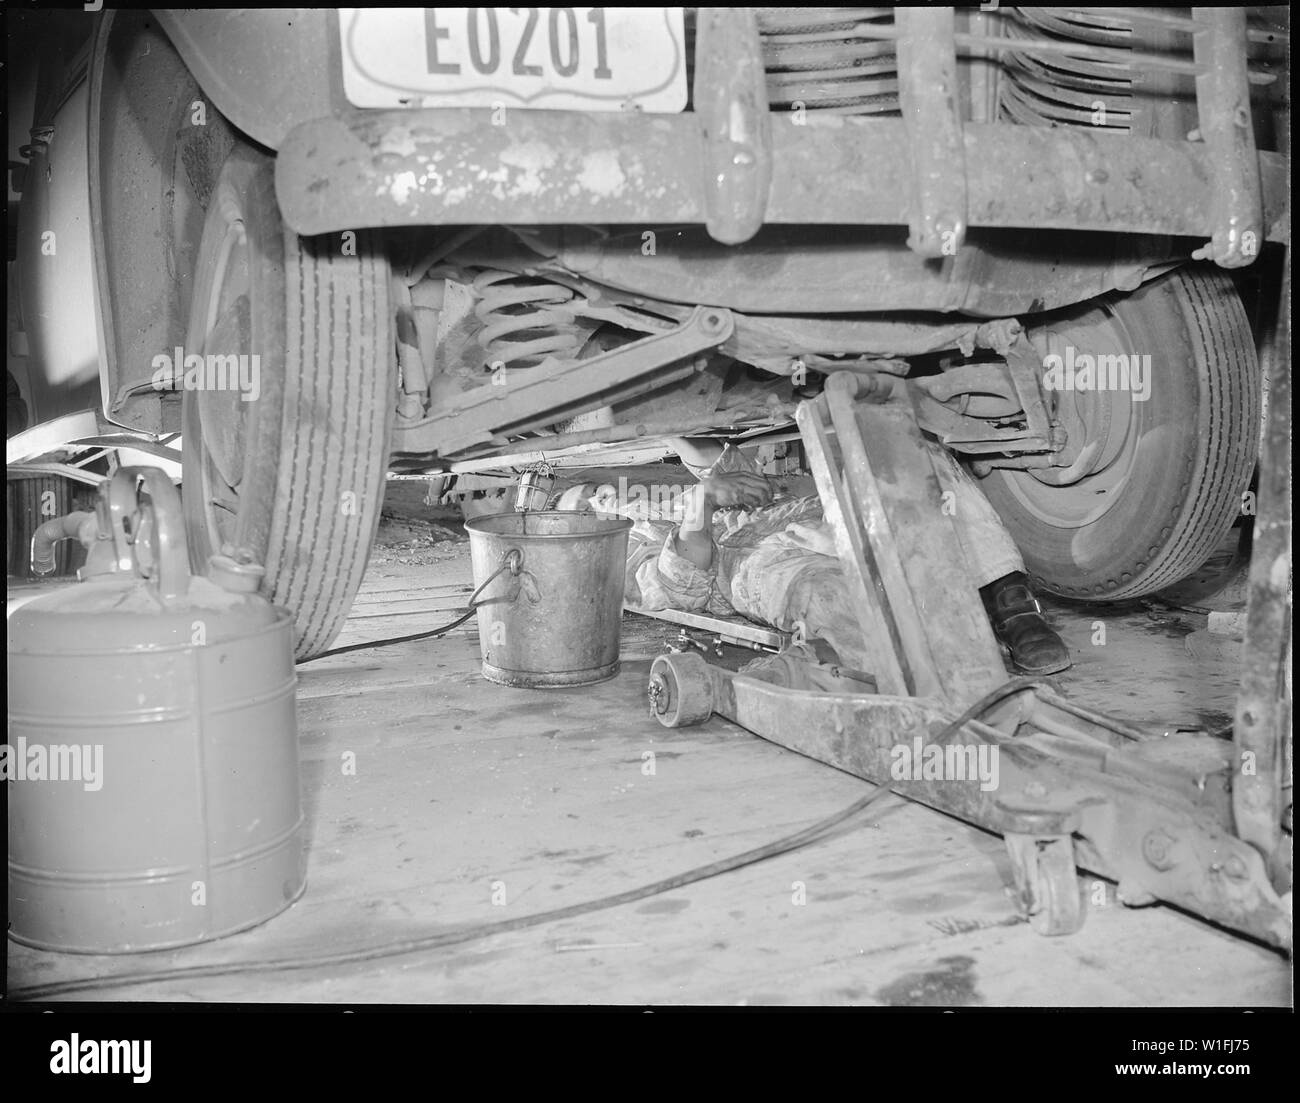 Jerome Relocation Center, Denson, Arkansas. A young Nisei mechanic under a project car in a tempora . . .; Scope and content:  The full caption for this photograph reads: Jerome Relocation Center, Denson, Arkansas. A young Nisei mechanic under a project car in a temporary shop. Stock Photo